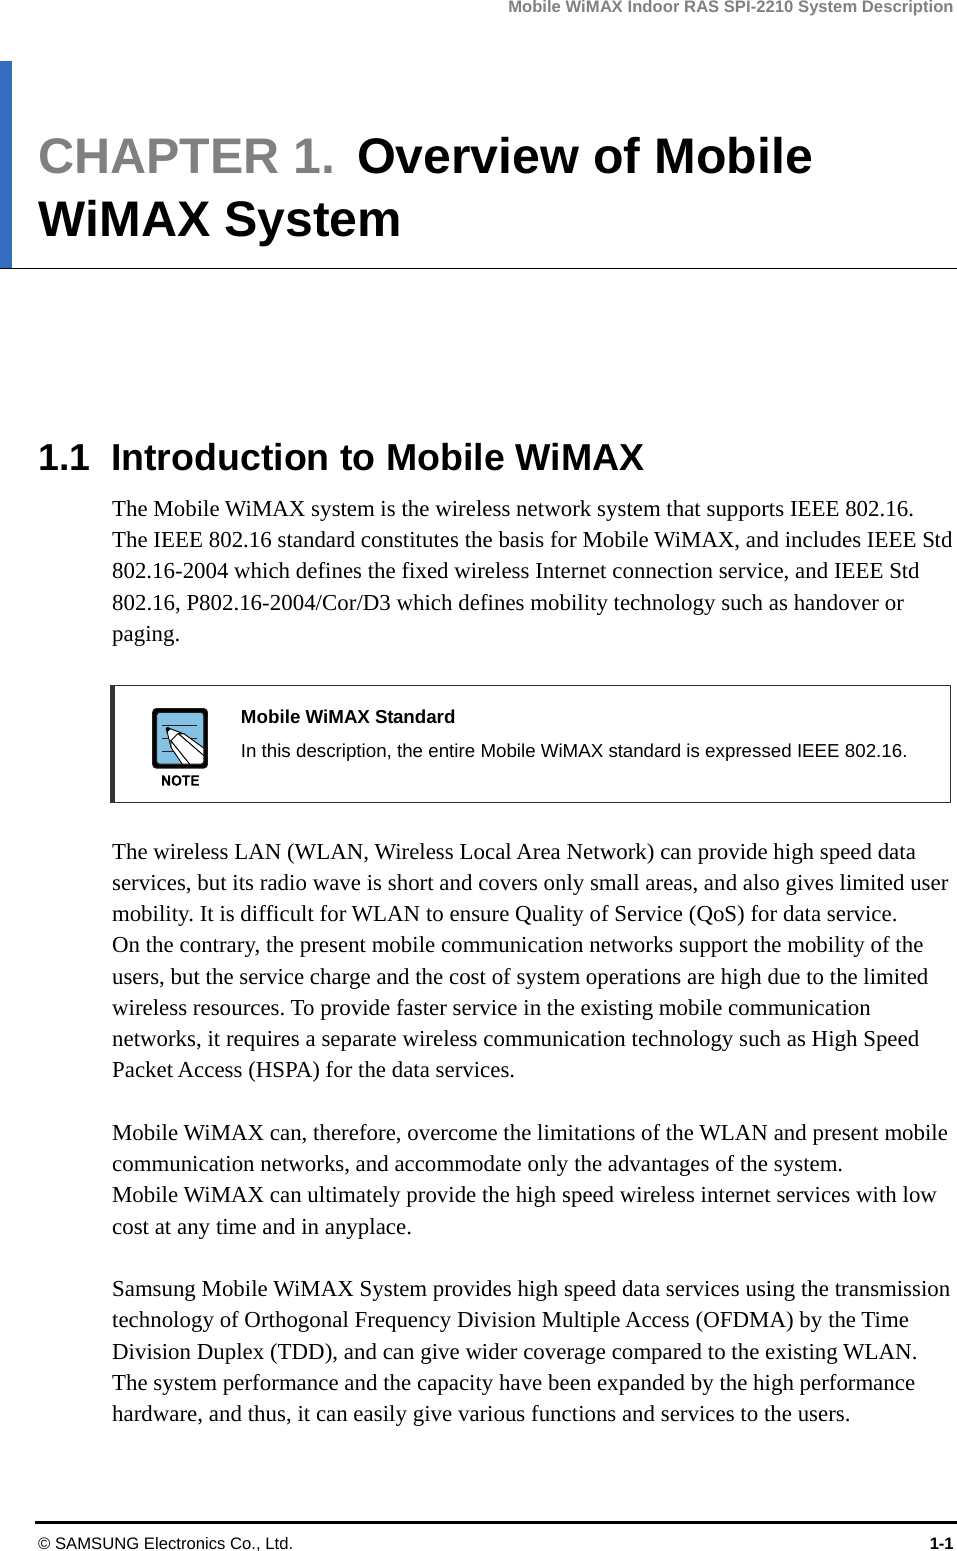 Mobile WiMAX Indoor RAS SPI-2210 System Description © SAMSUNG Electronics Co., Ltd.  1-1 CHAPTER 1.  Overview of Mobile WiMAX System      1.1  Introduction to Mobile WiMAX The Mobile WiMAX system is the wireless network system that supports IEEE 802.16. The IEEE 802.16 standard constitutes the basis for Mobile WiMAX, and includes IEEE Std 802.16-2004 which defines the fixed wireless Internet connection service, and IEEE Std 802.16, P802.16-2004/Cor/D3 which defines mobility technology such as handover or paging.   Mobile WiMAX Standard   In this description, the entire Mobile WiMAX standard is expressed IEEE 802.16.  The wireless LAN (WLAN, Wireless Local Area Network) can provide high speed data services, but its radio wave is short and covers only small areas, and also gives limited user mobility. It is difficult for WLAN to ensure Quality of Service (QoS) for data service. On the contrary, the present mobile communication networks support the mobility of the users, but the service charge and the cost of system operations are high due to the limited wireless resources. To provide faster service in the existing mobile communication networks, it requires a separate wireless communication technology such as High Speed Packet Access (HSPA) for the data services.  Mobile WiMAX can, therefore, overcome the limitations of the WLAN and present mobile communication networks, and accommodate only the advantages of the system. Mobile WiMAX can ultimately provide the high speed wireless internet services with low cost at any time and in anyplace.    Samsung Mobile WiMAX System provides high speed data services using the transmission technology of Orthogonal Frequency Division Multiple Access (OFDMA) by the Time Division Duplex (TDD), and can give wider coverage compared to the existing WLAN. The system performance and the capacity have been expanded by the high performance hardware, and thus, it can easily give various functions and services to the users.  